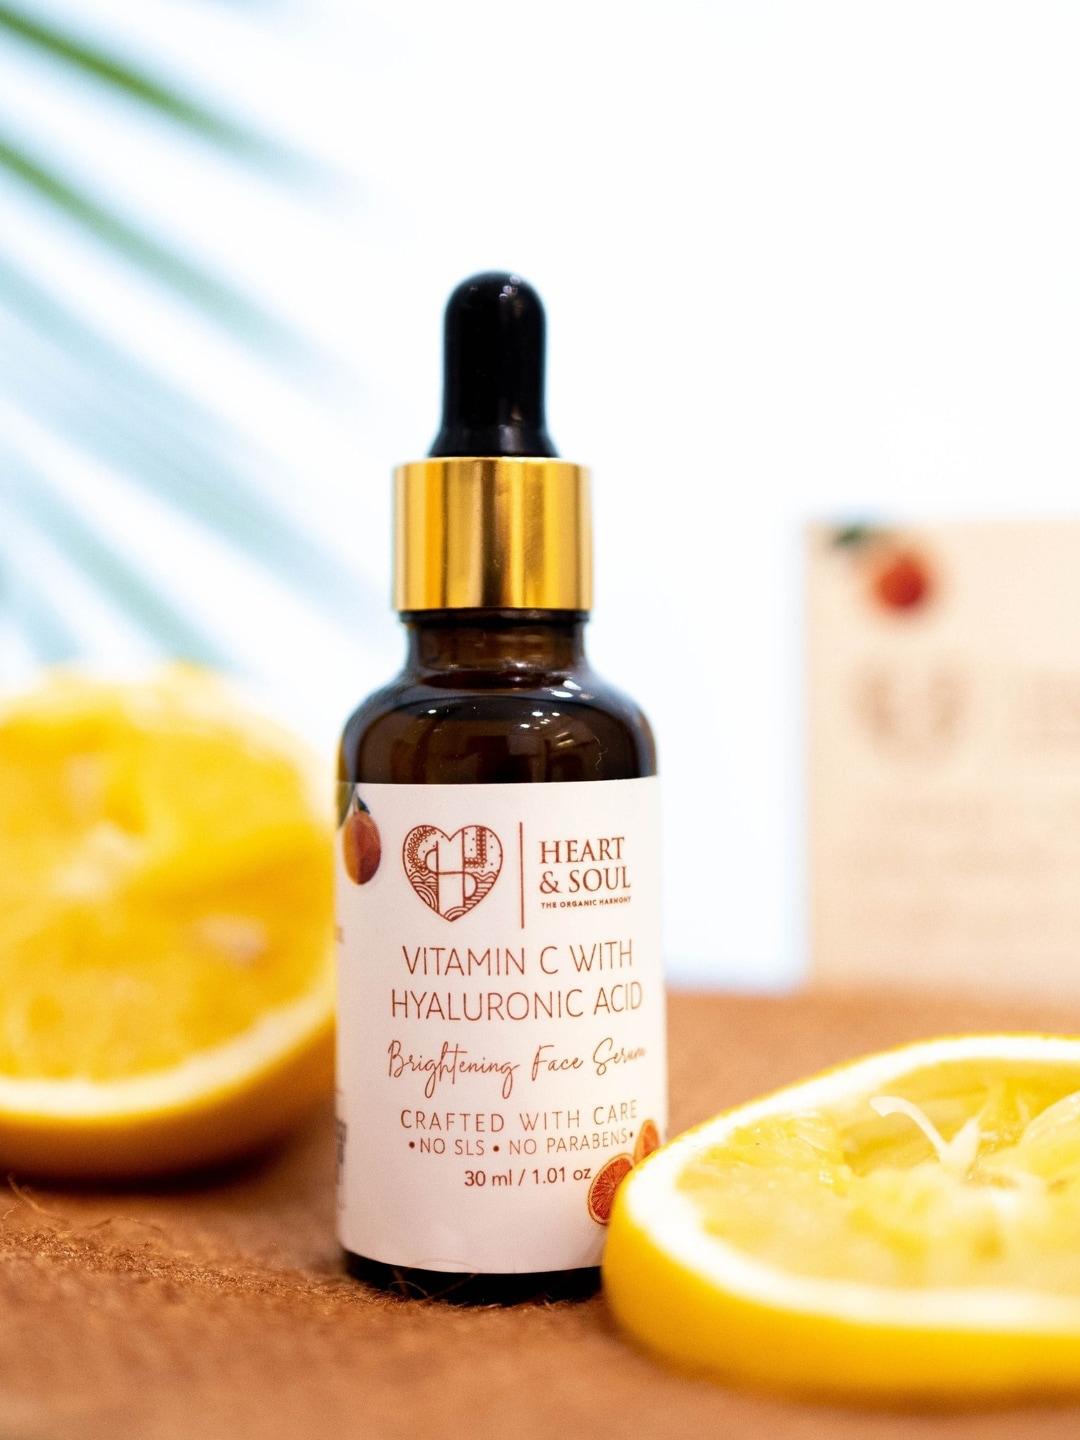 HEART AND SOUL Vitamin C with Hyaluronic Acid Brightening Face Serum